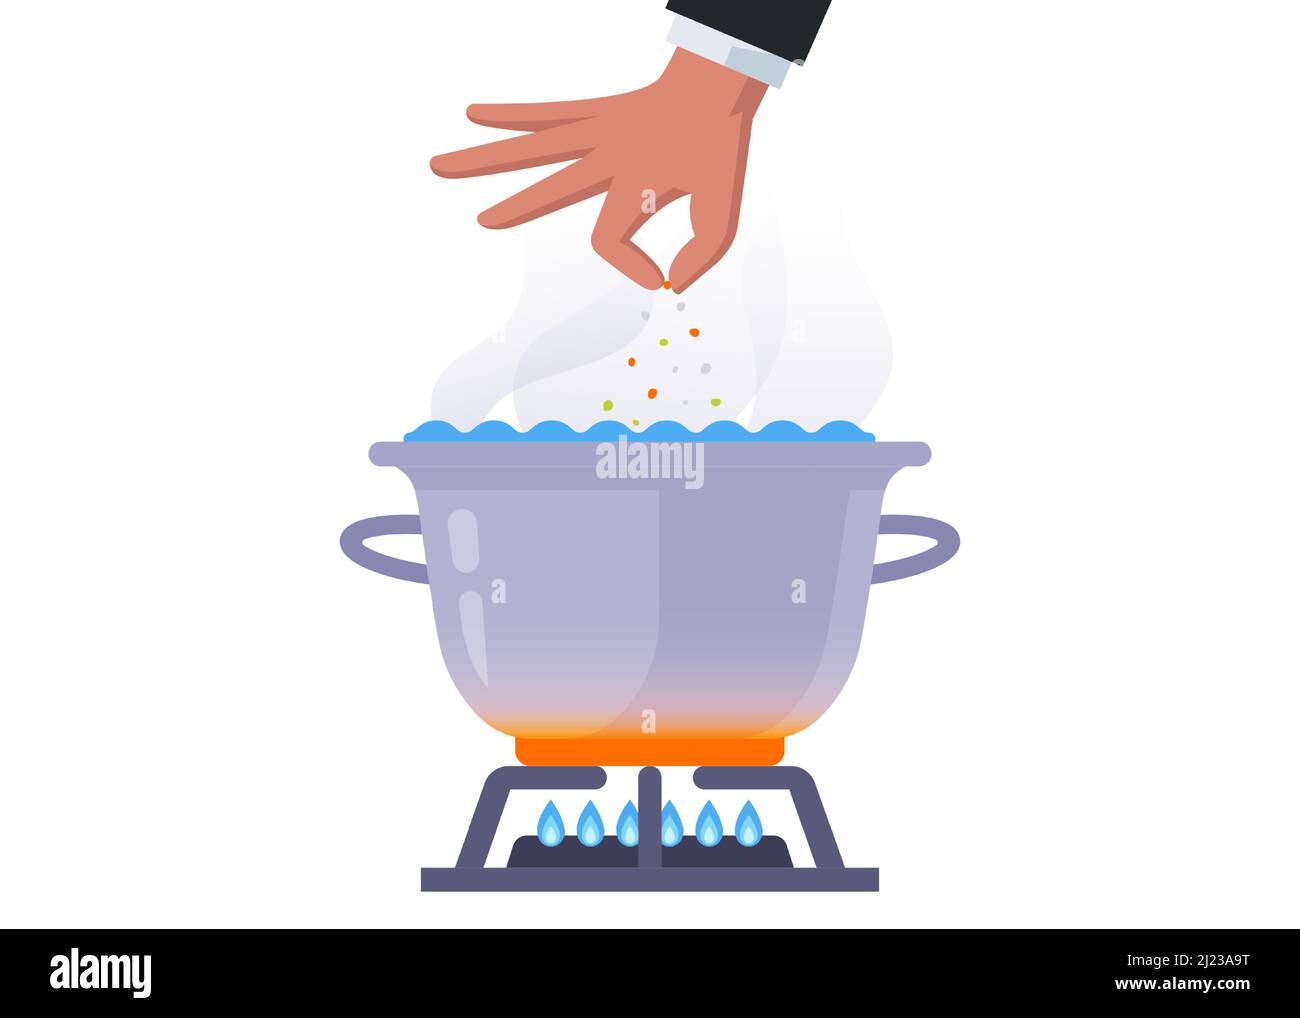 https://c8.alamy.com/comp/2J23A9T/add-spices-to-hot-pot-cooking-soup-on-a-gas-stove-flat-vector-illustration-2J23A9T.jpg